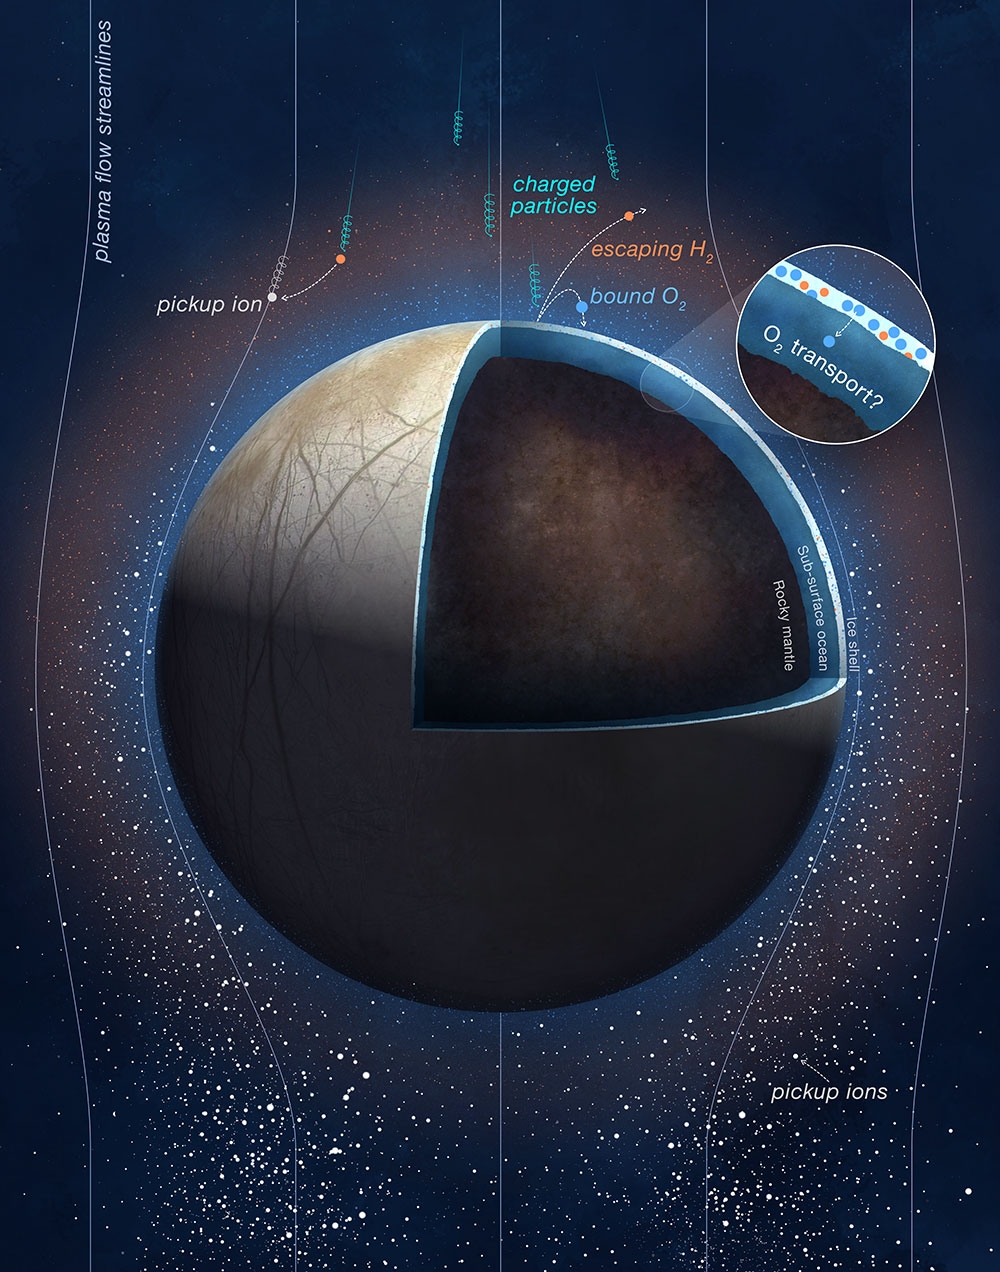 This illustration shows charged particles from Jupiter impacting Europa's surface